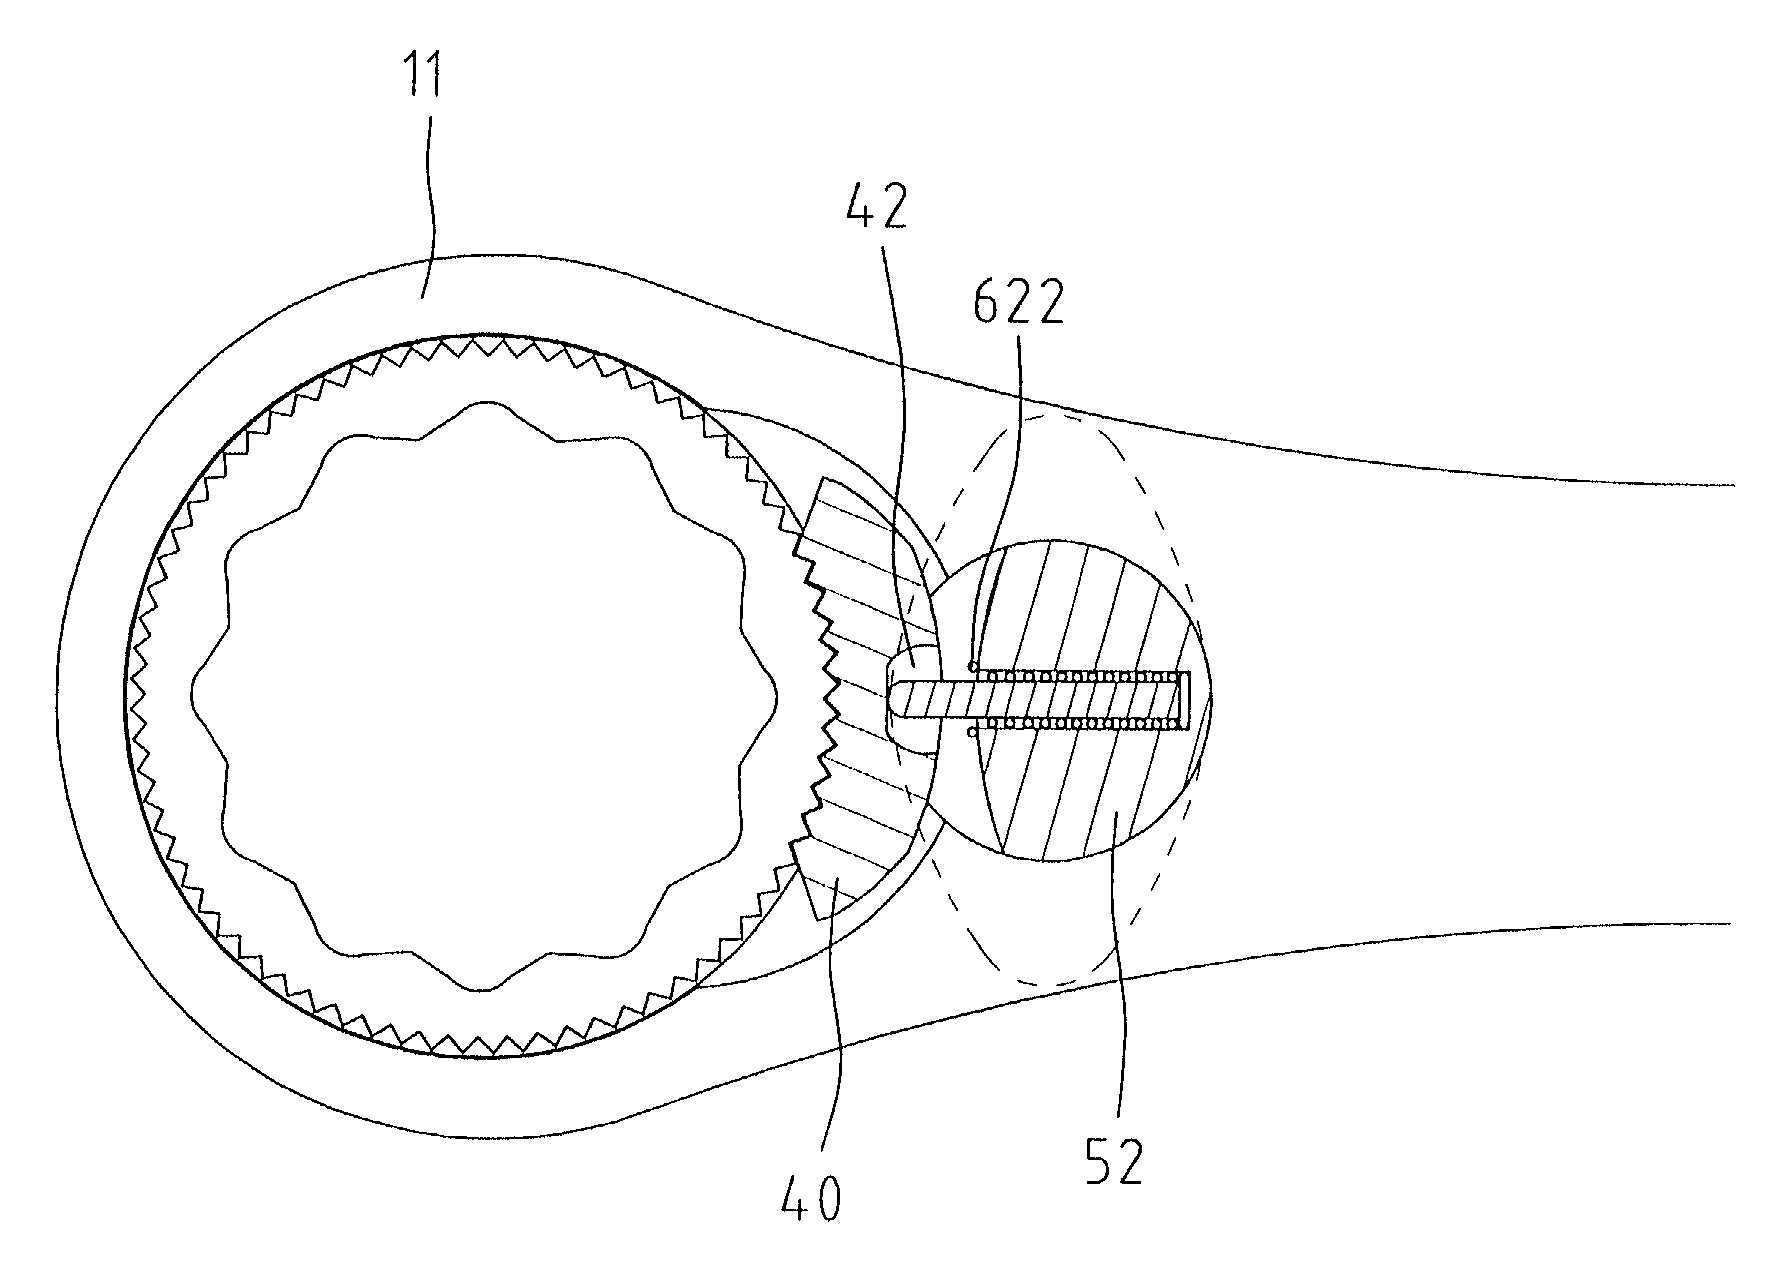 Biasing arrangement for a pawl of a reversible ratchet-type wrench